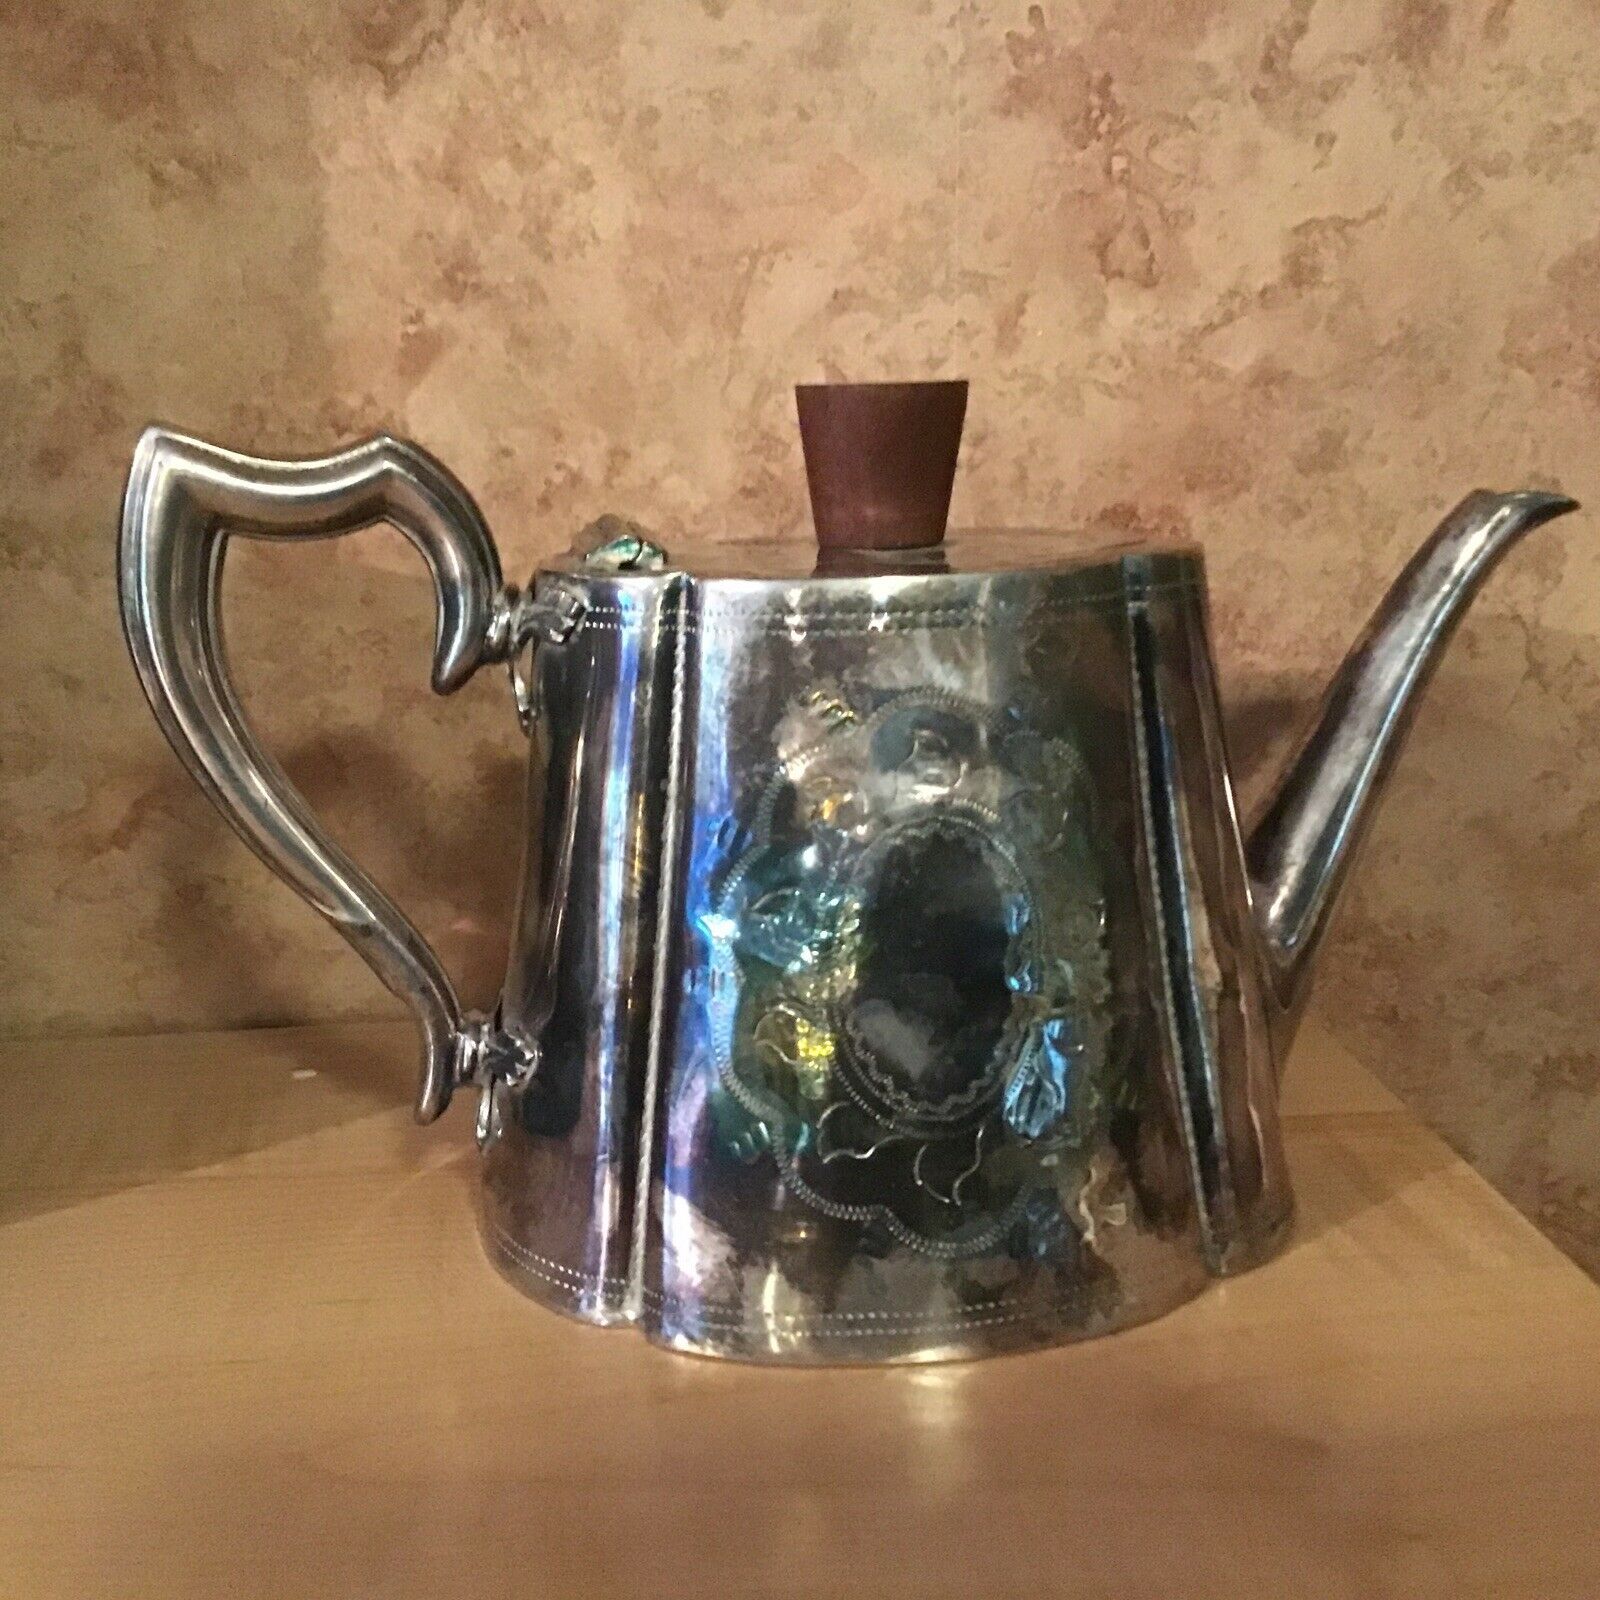 Very Old Silver Teapot, Looks To Be Silver plated, No Markings, But Just So Nice